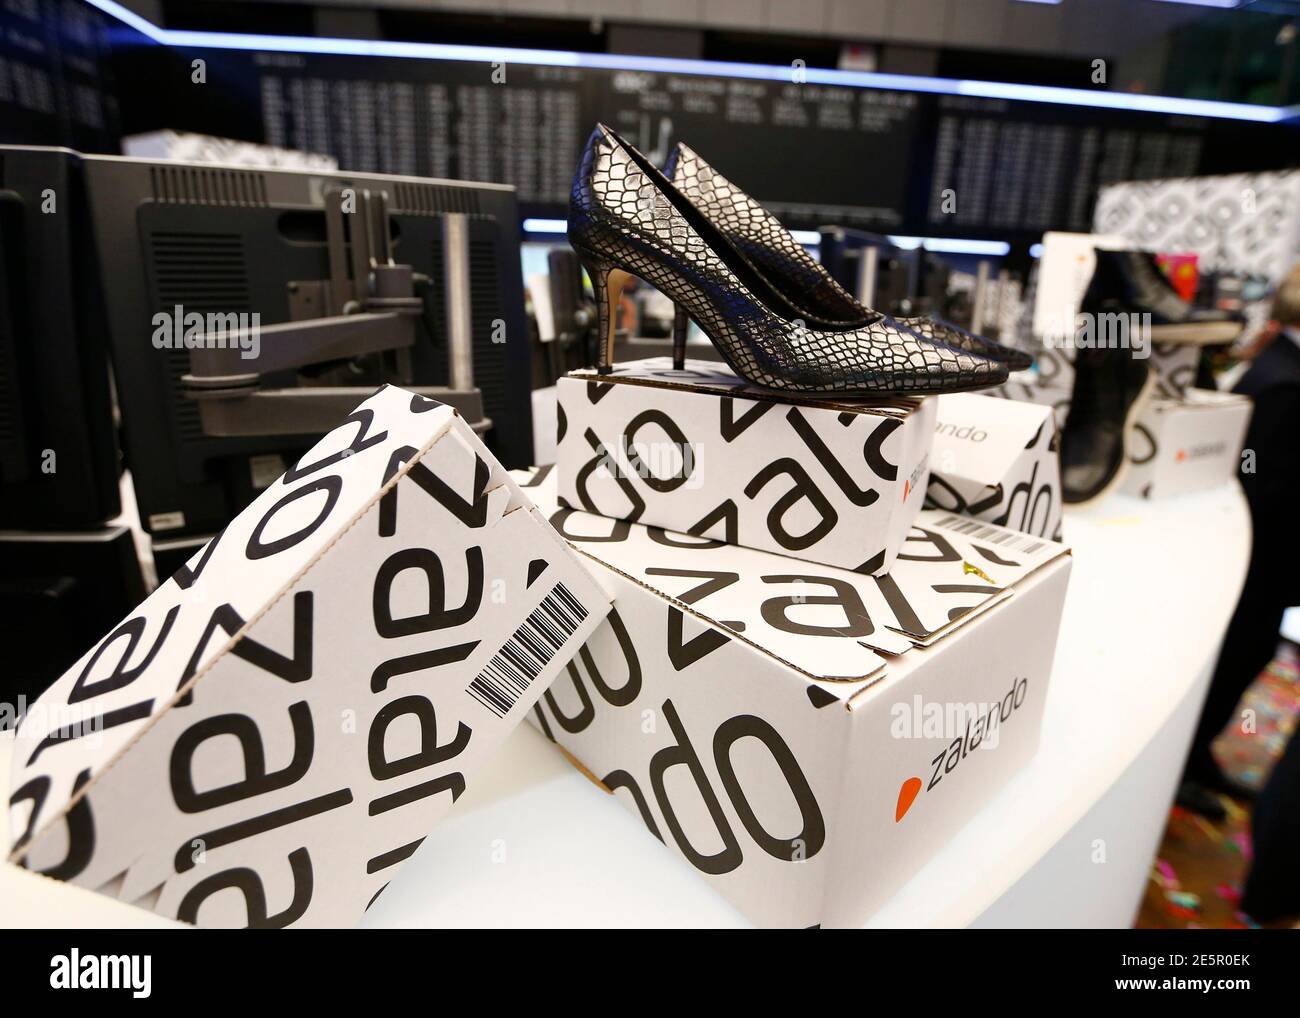 Shoes of fashion retailer Zalando are displayed during the initial public  offering of the company at the Frankfurt stock exchange October 1, 2014.  Shares in Europe's biggest online fashion retailer Zalando started